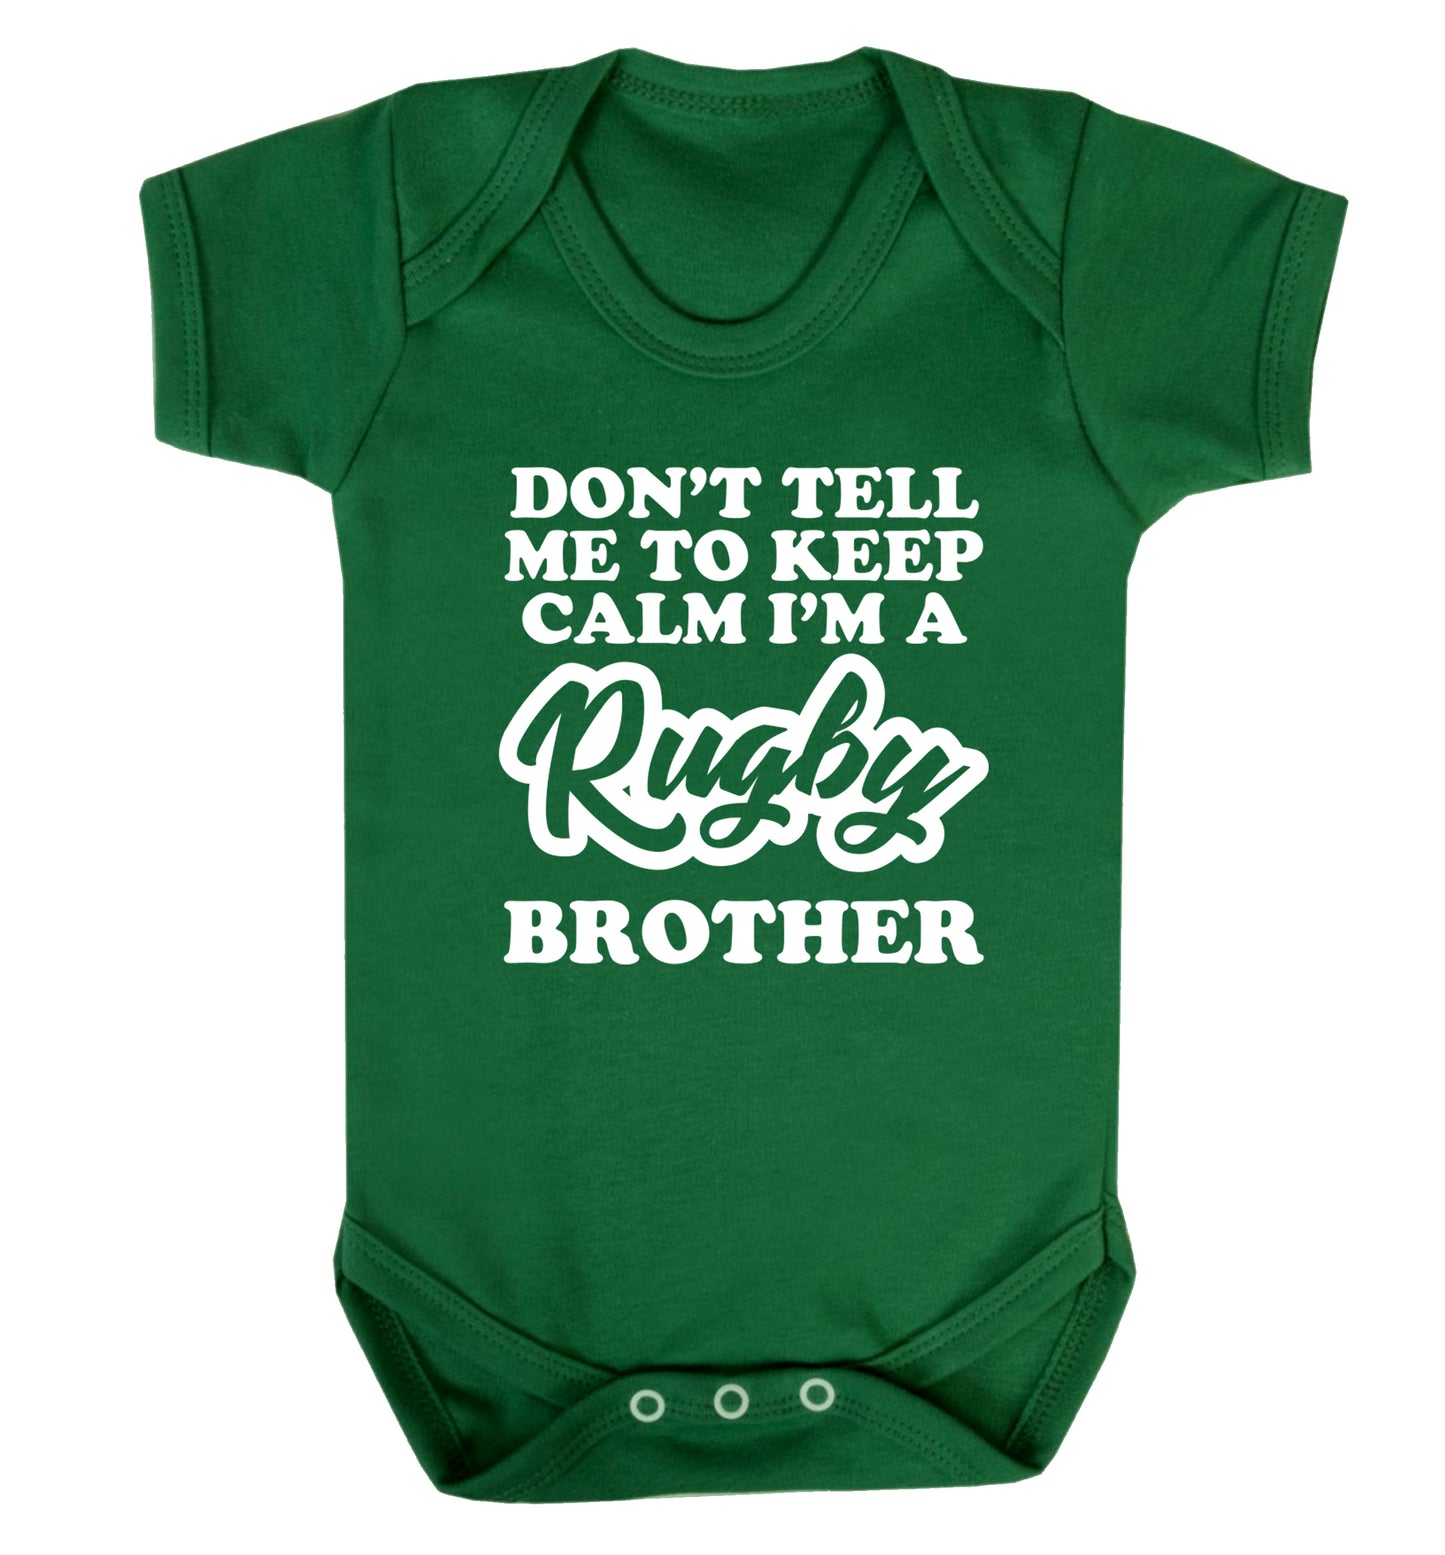 Don't tell me keep calm I'm a rugby brother Baby Vest green 18-24 months